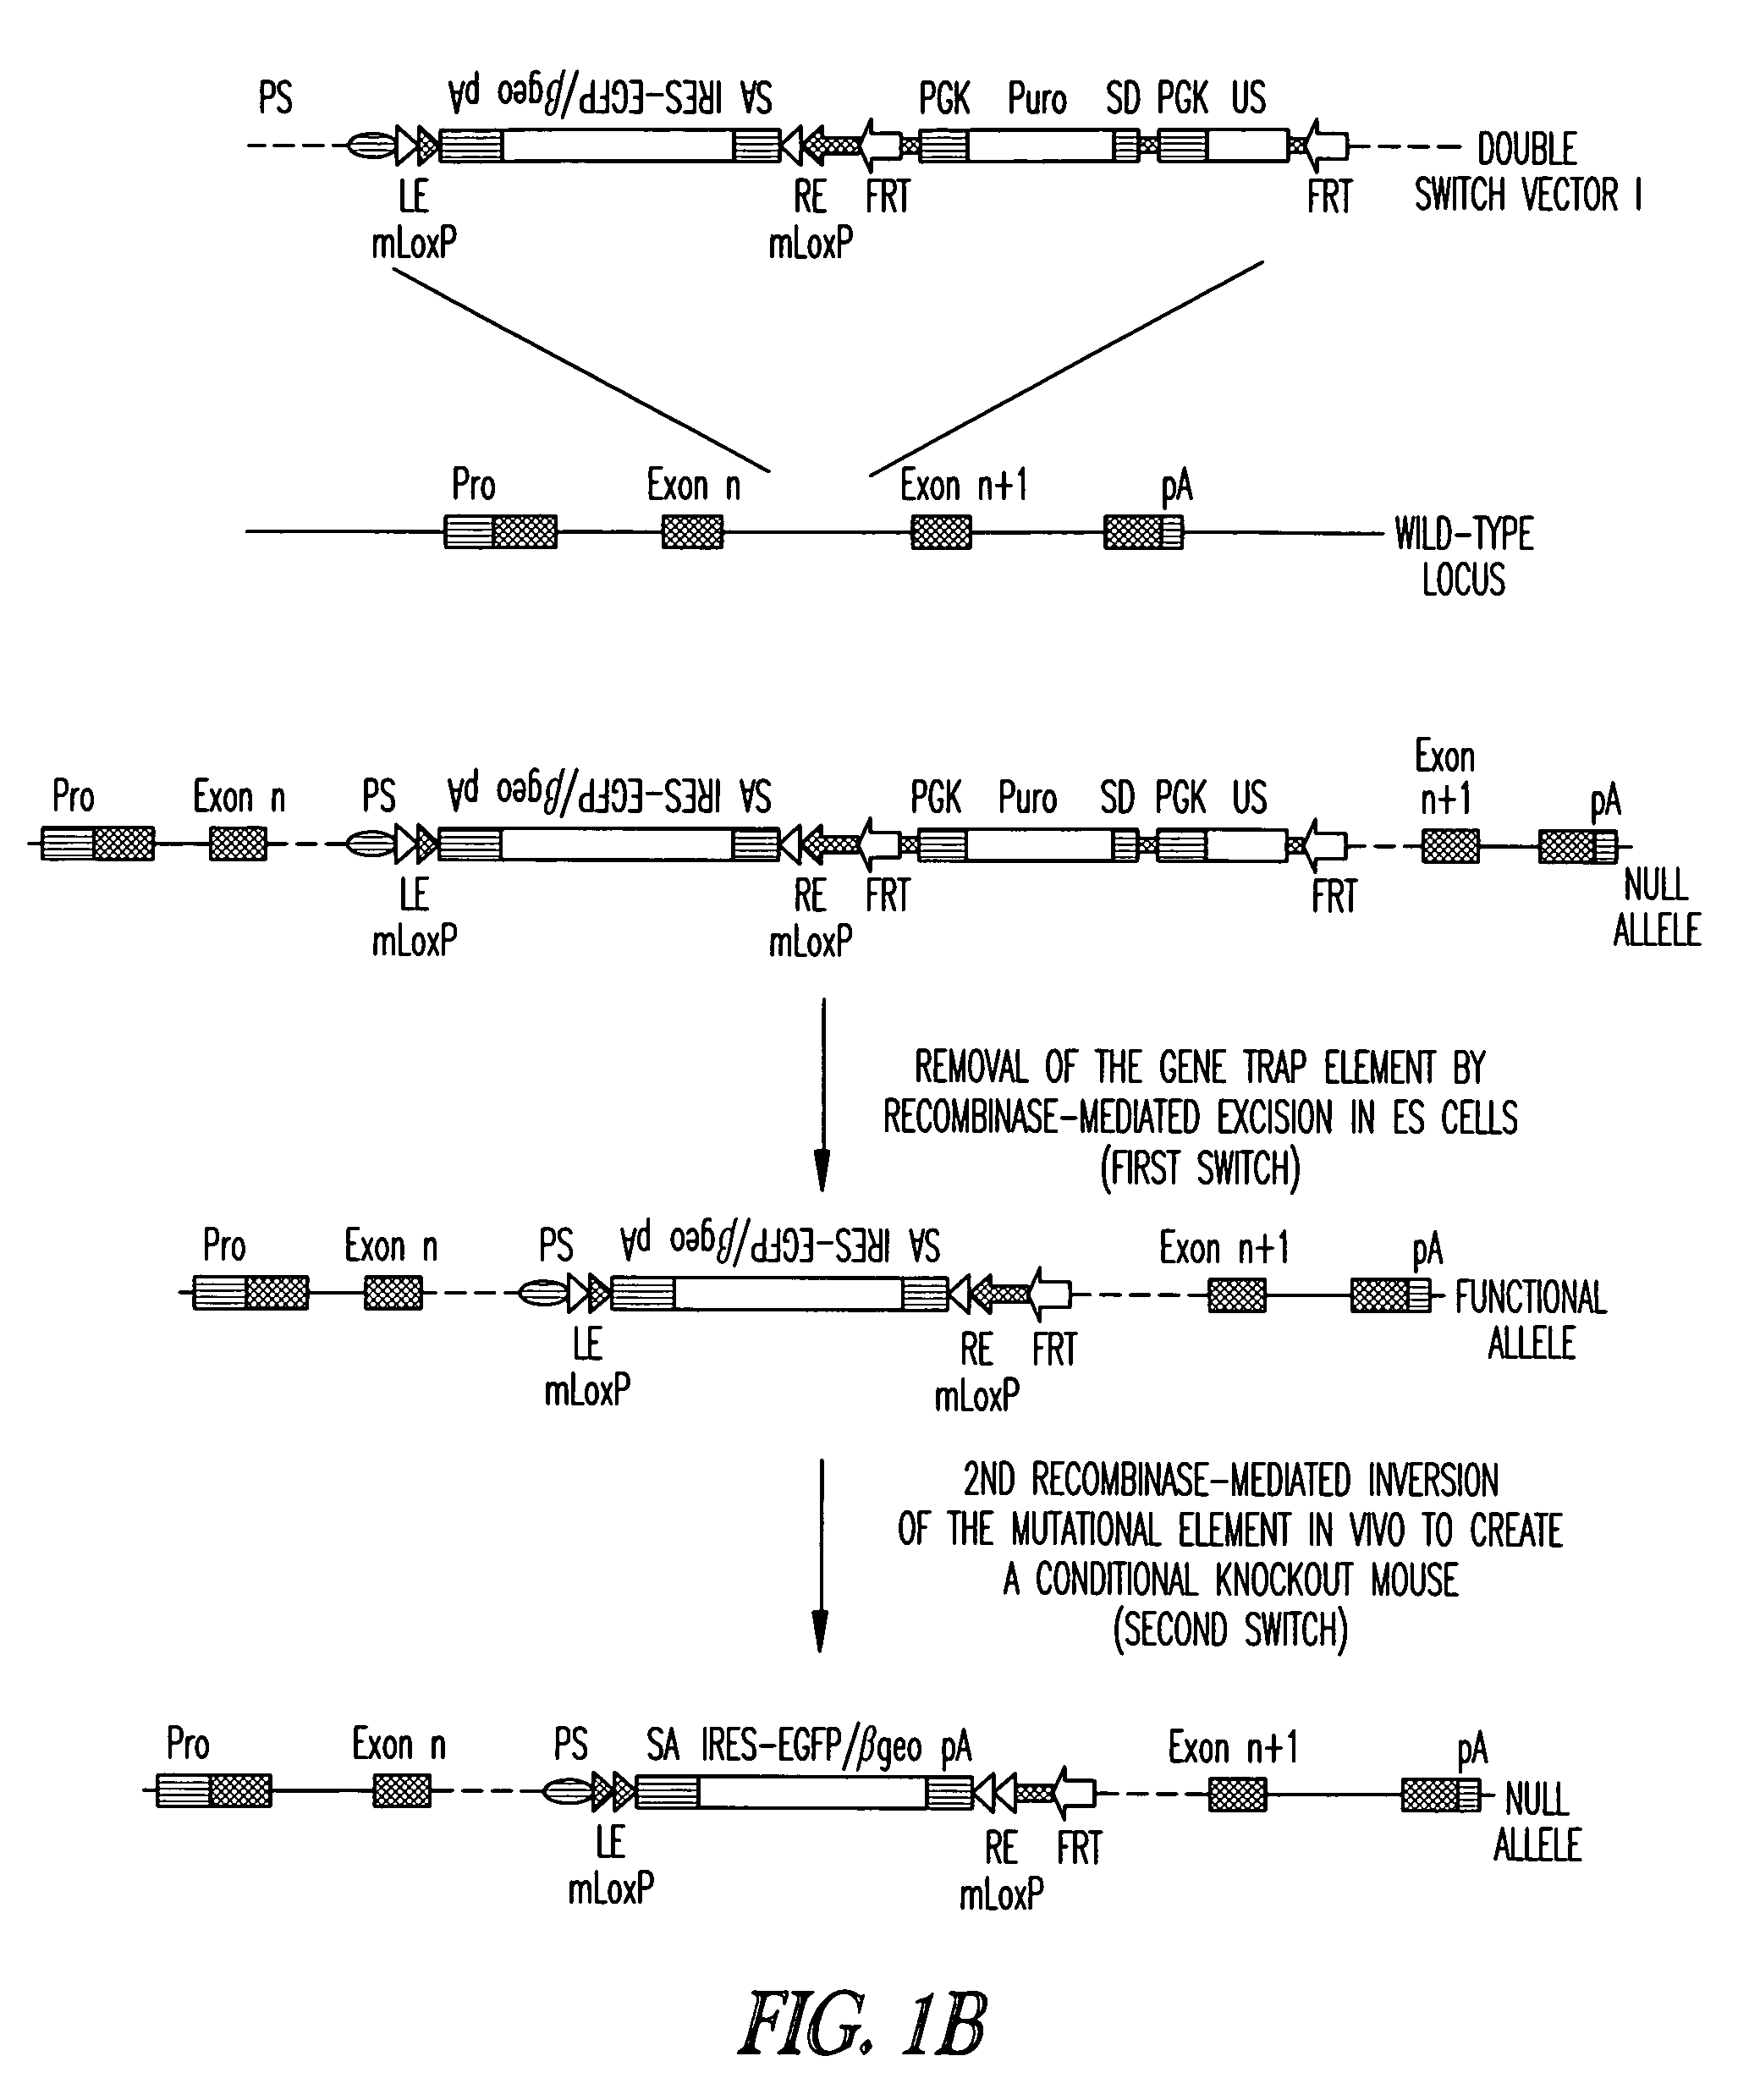 Vectors for conditional gene inactivation